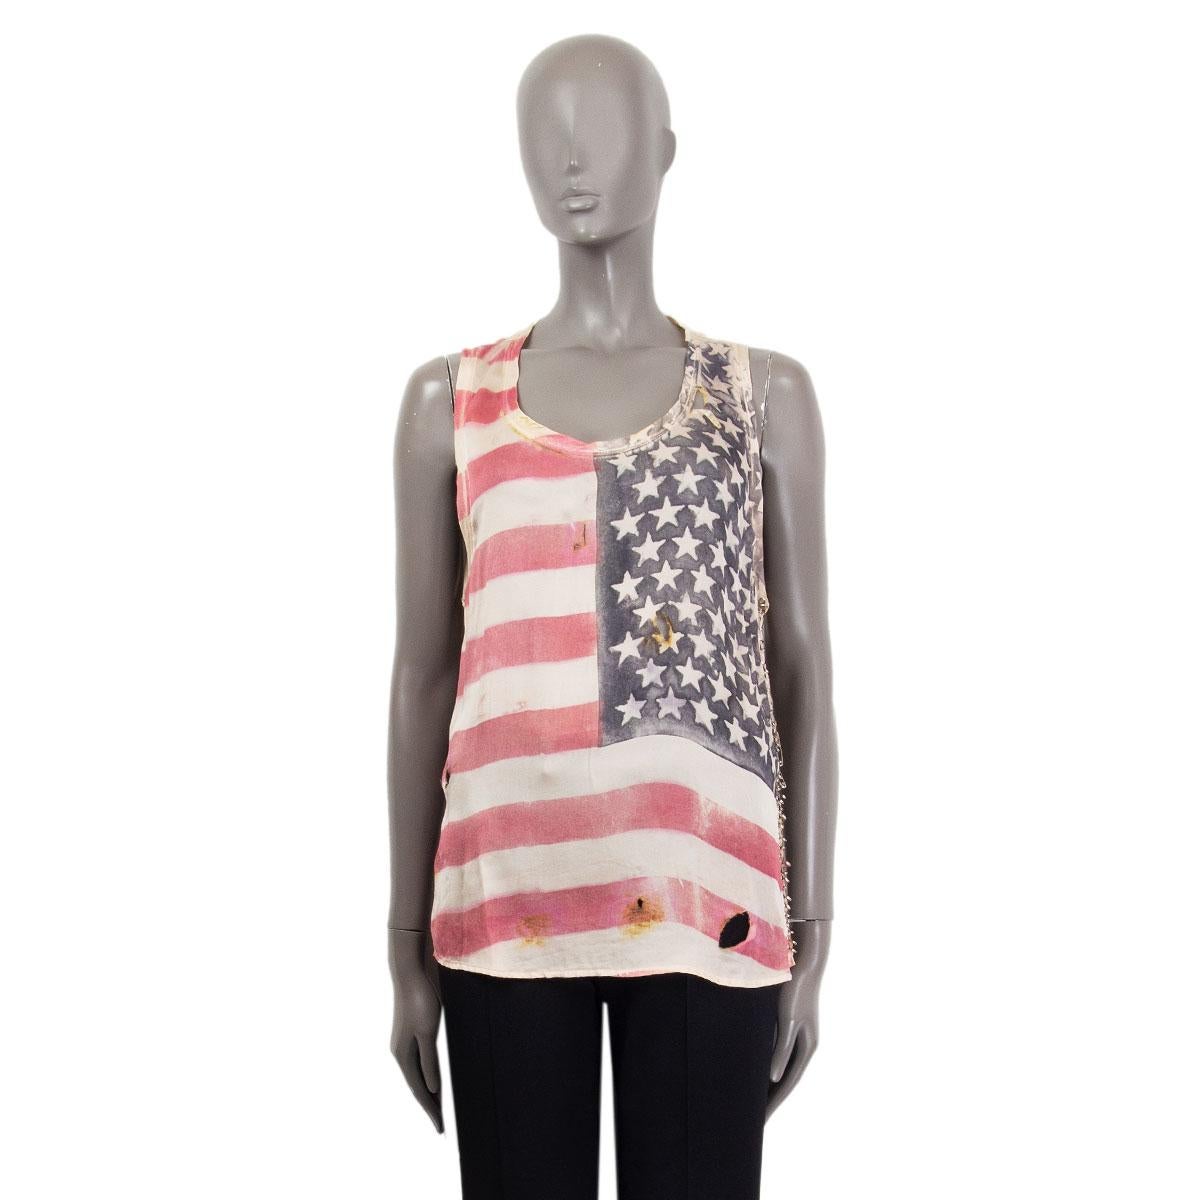 Balmain distressed and embellished flag print tank-top in off-white, red and pale blue silk (100%). Safety pins along the side seem. Has been worn and is in excellent condition. 

Tag Size 38
Size S
Bust 102cm (39.8in)
Waist 104cm (40.6in)
Hips